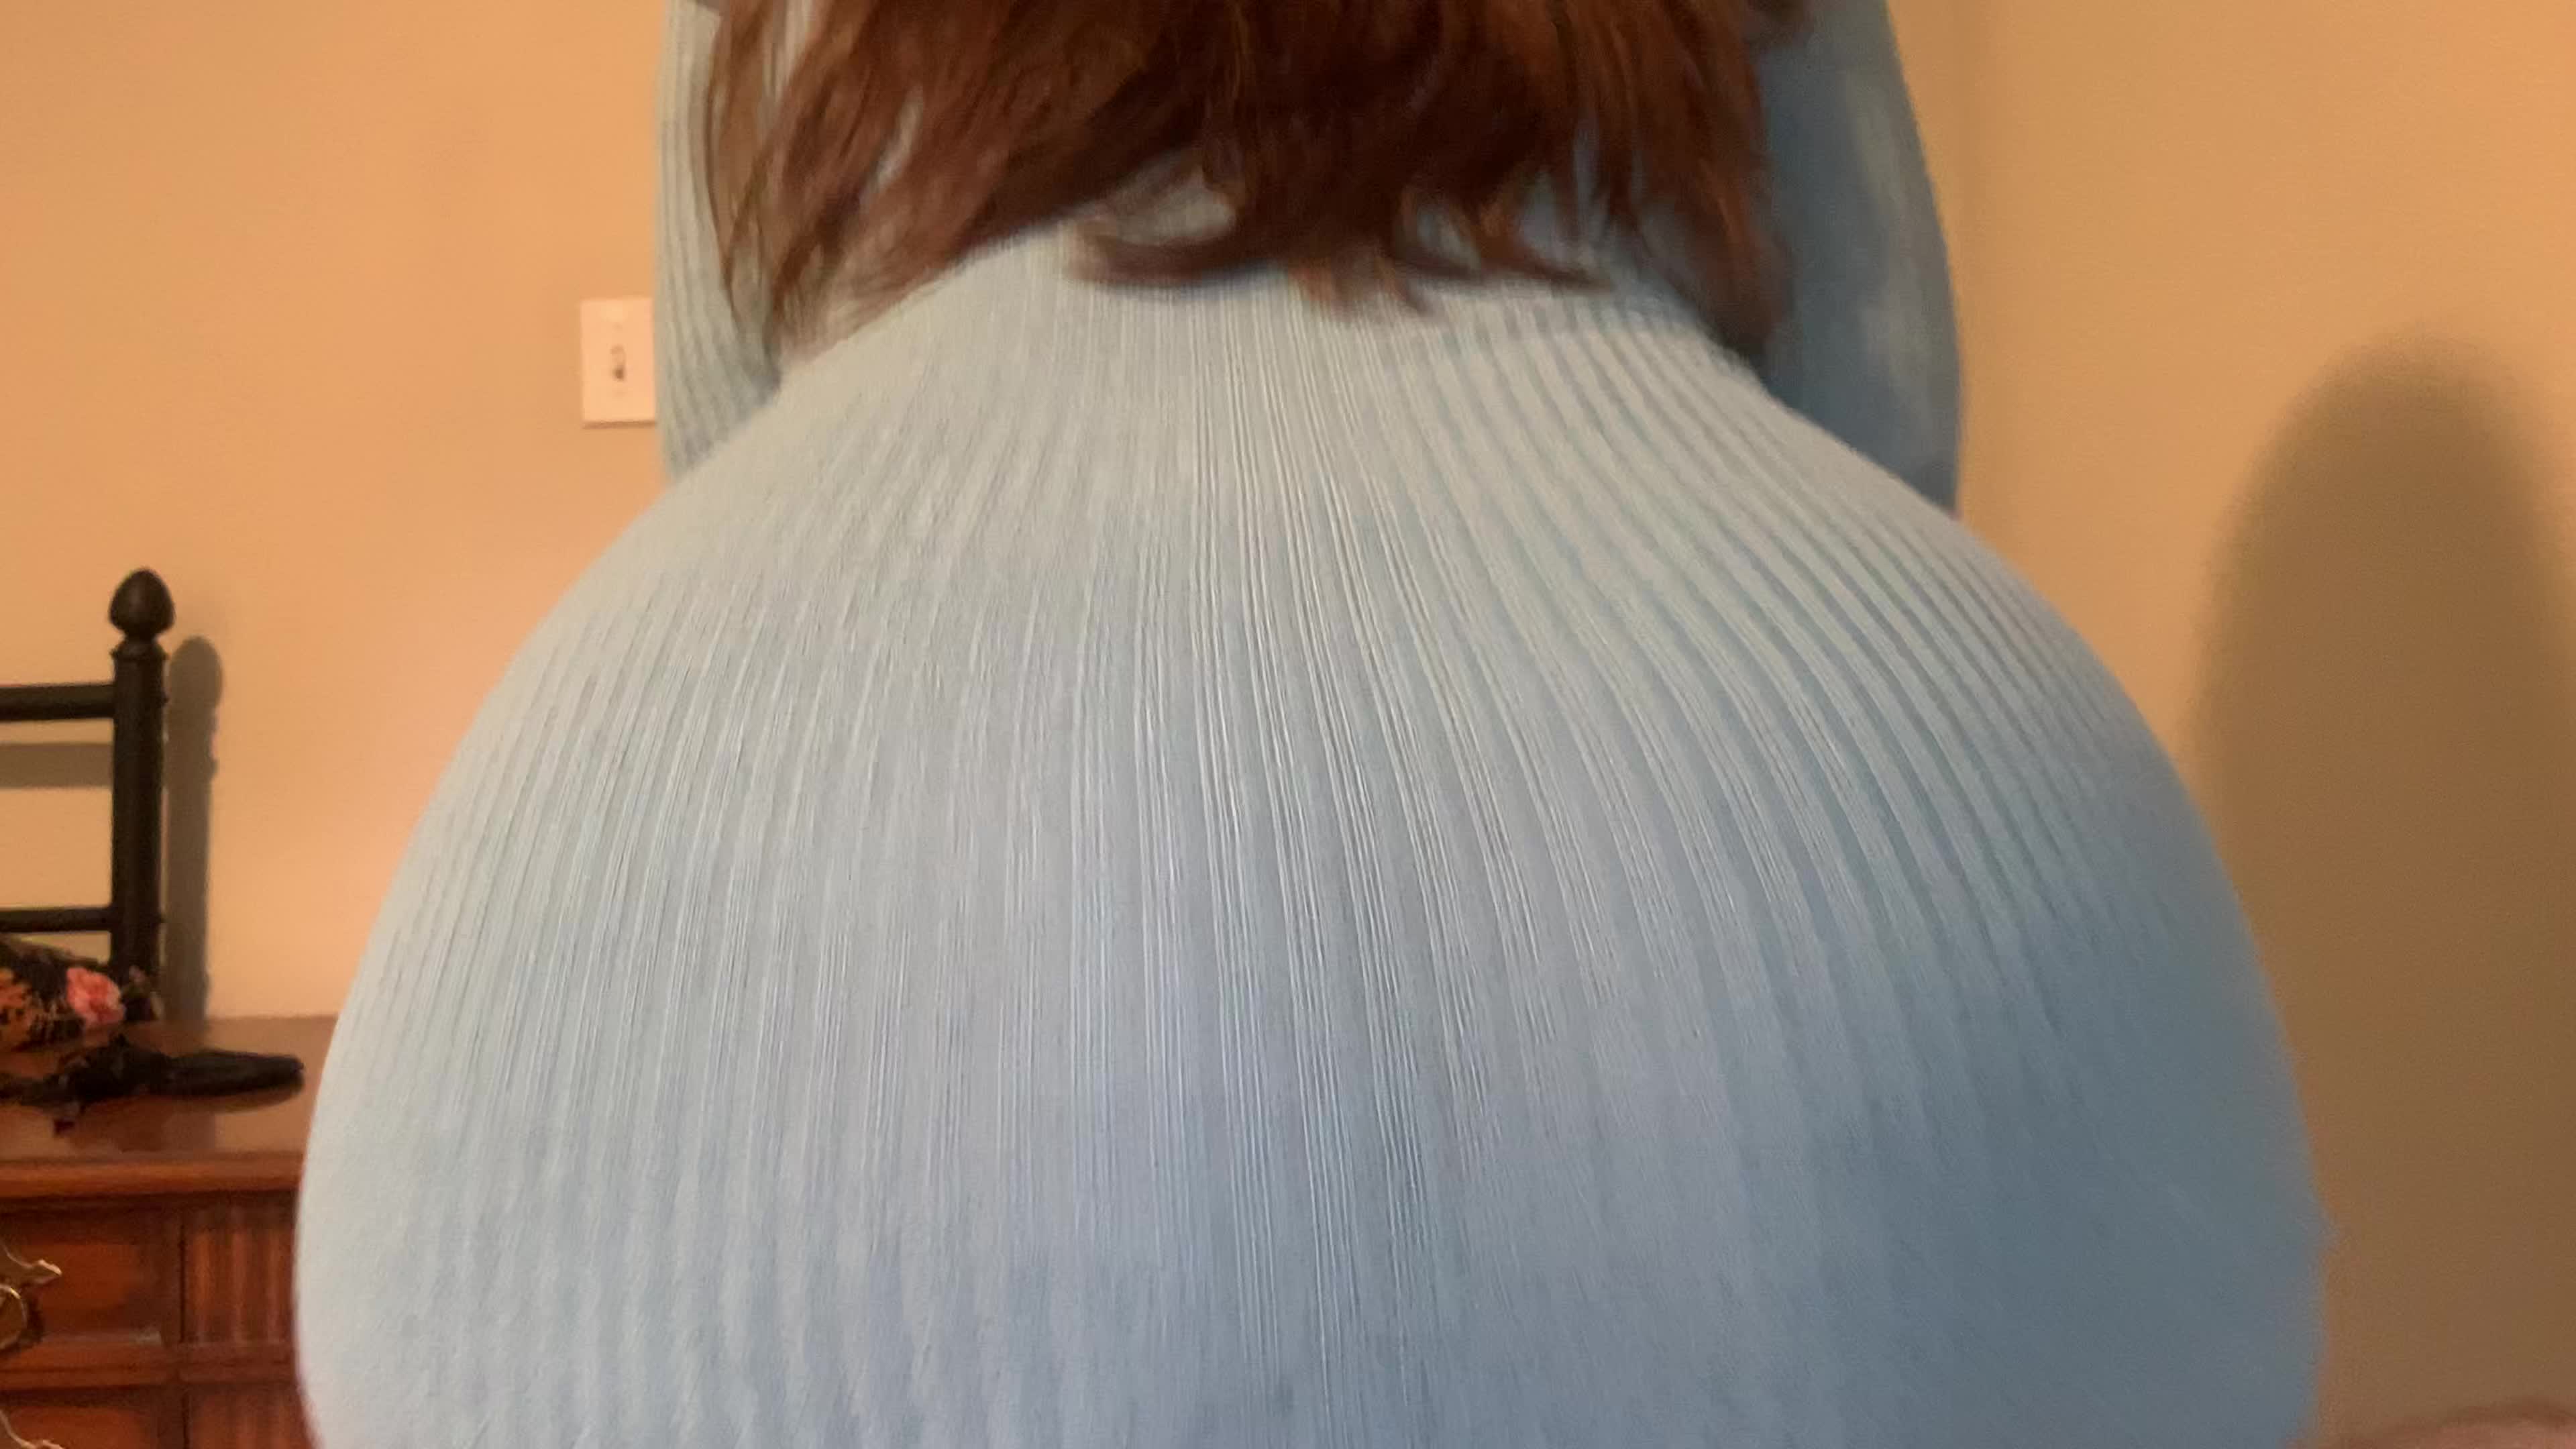 Would you let my wife bounce up and down on your cock